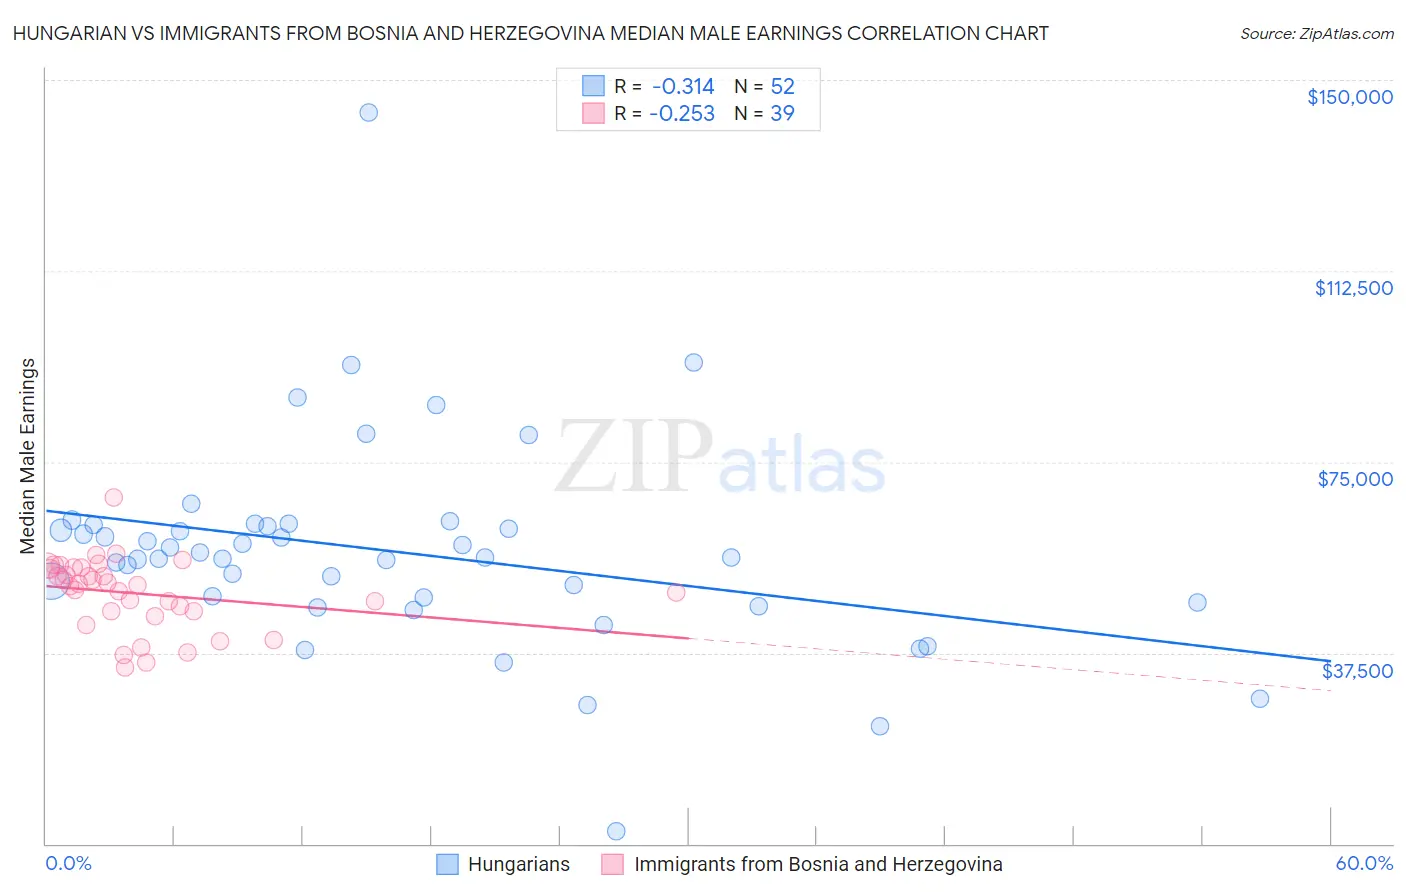 Hungarian vs Immigrants from Bosnia and Herzegovina Median Male Earnings